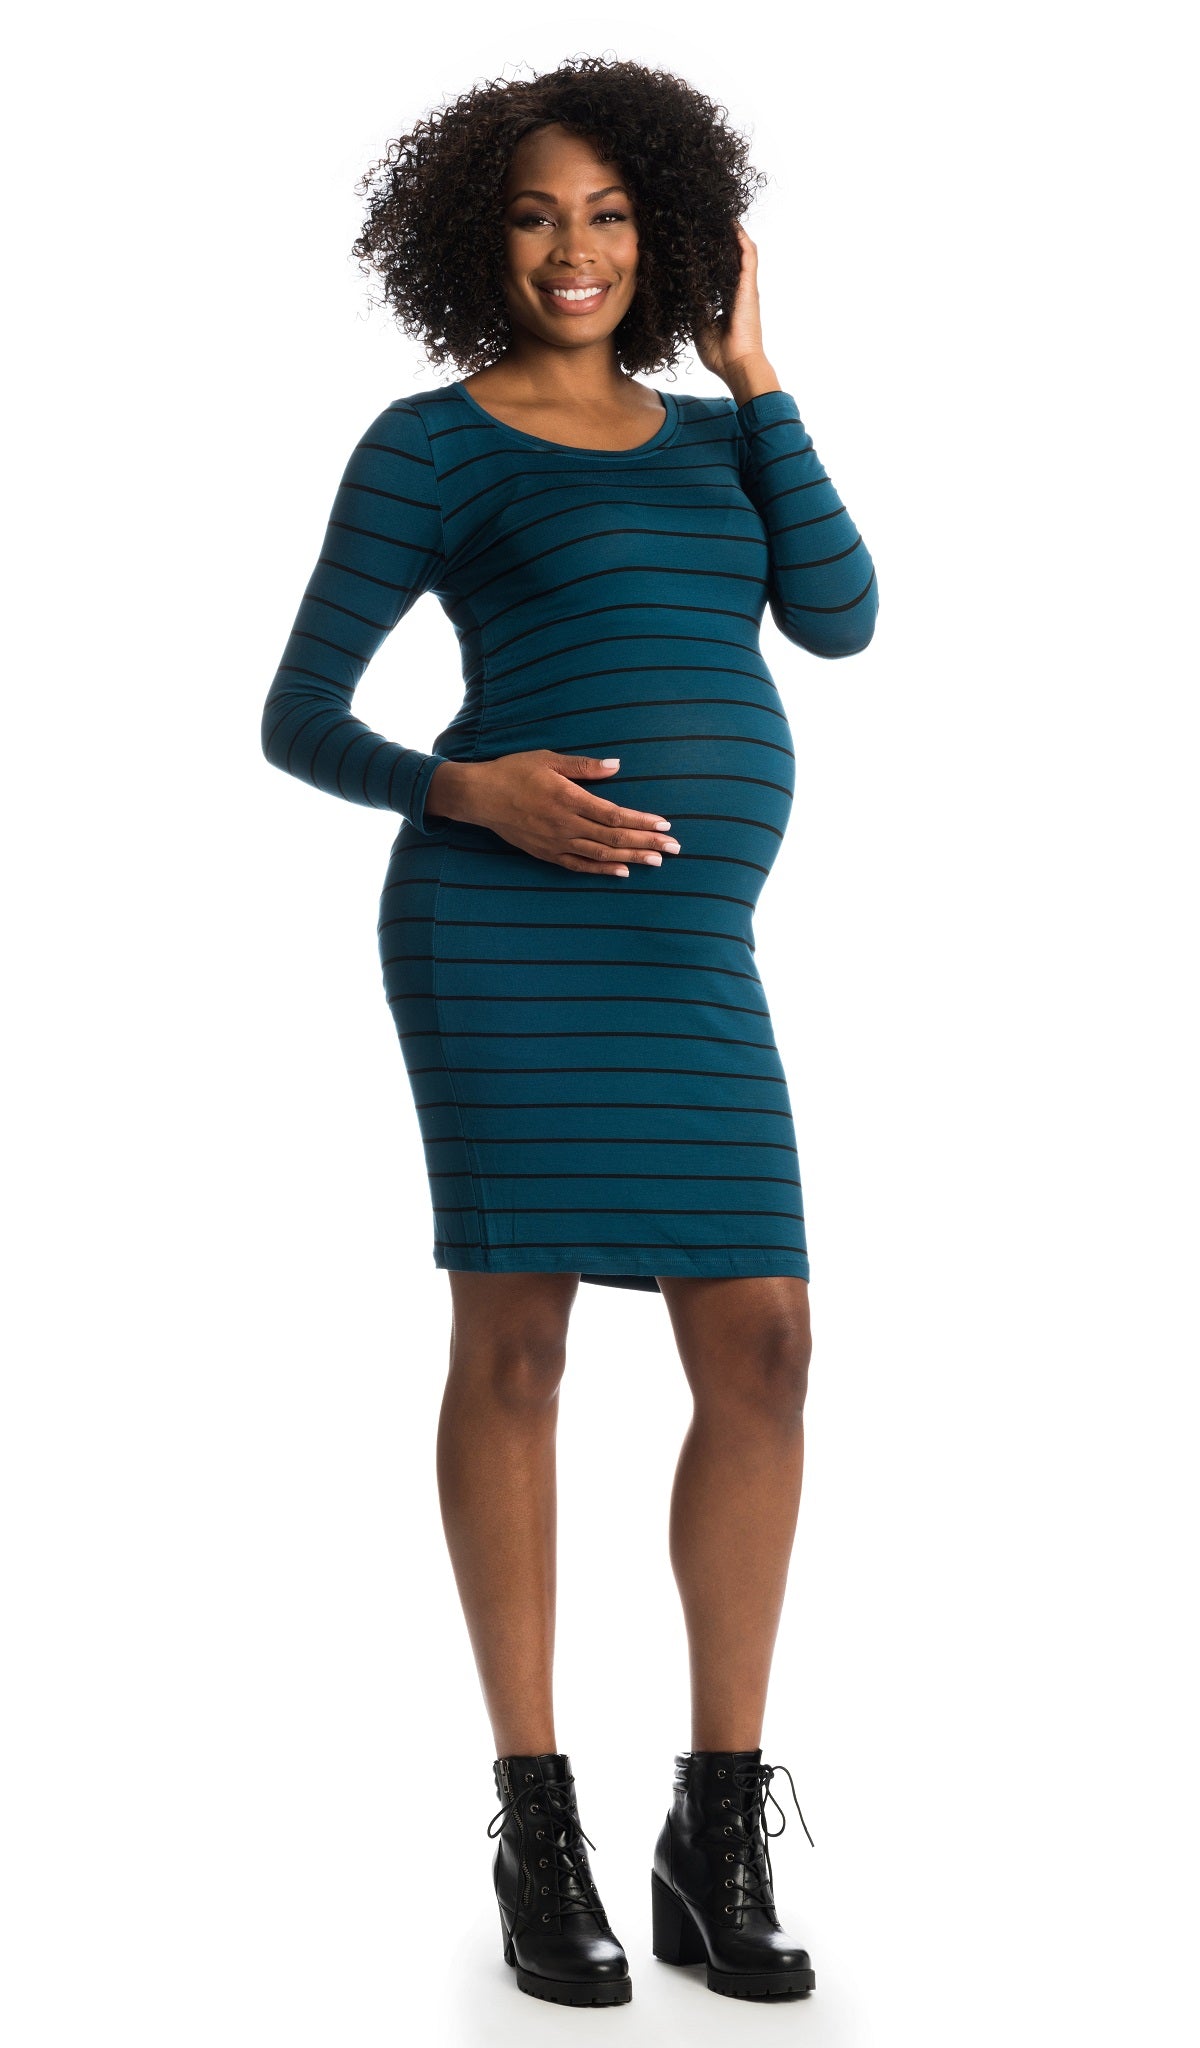 Teal Stripe Hanh dress worn by pregnant woman with one hand on her belly.